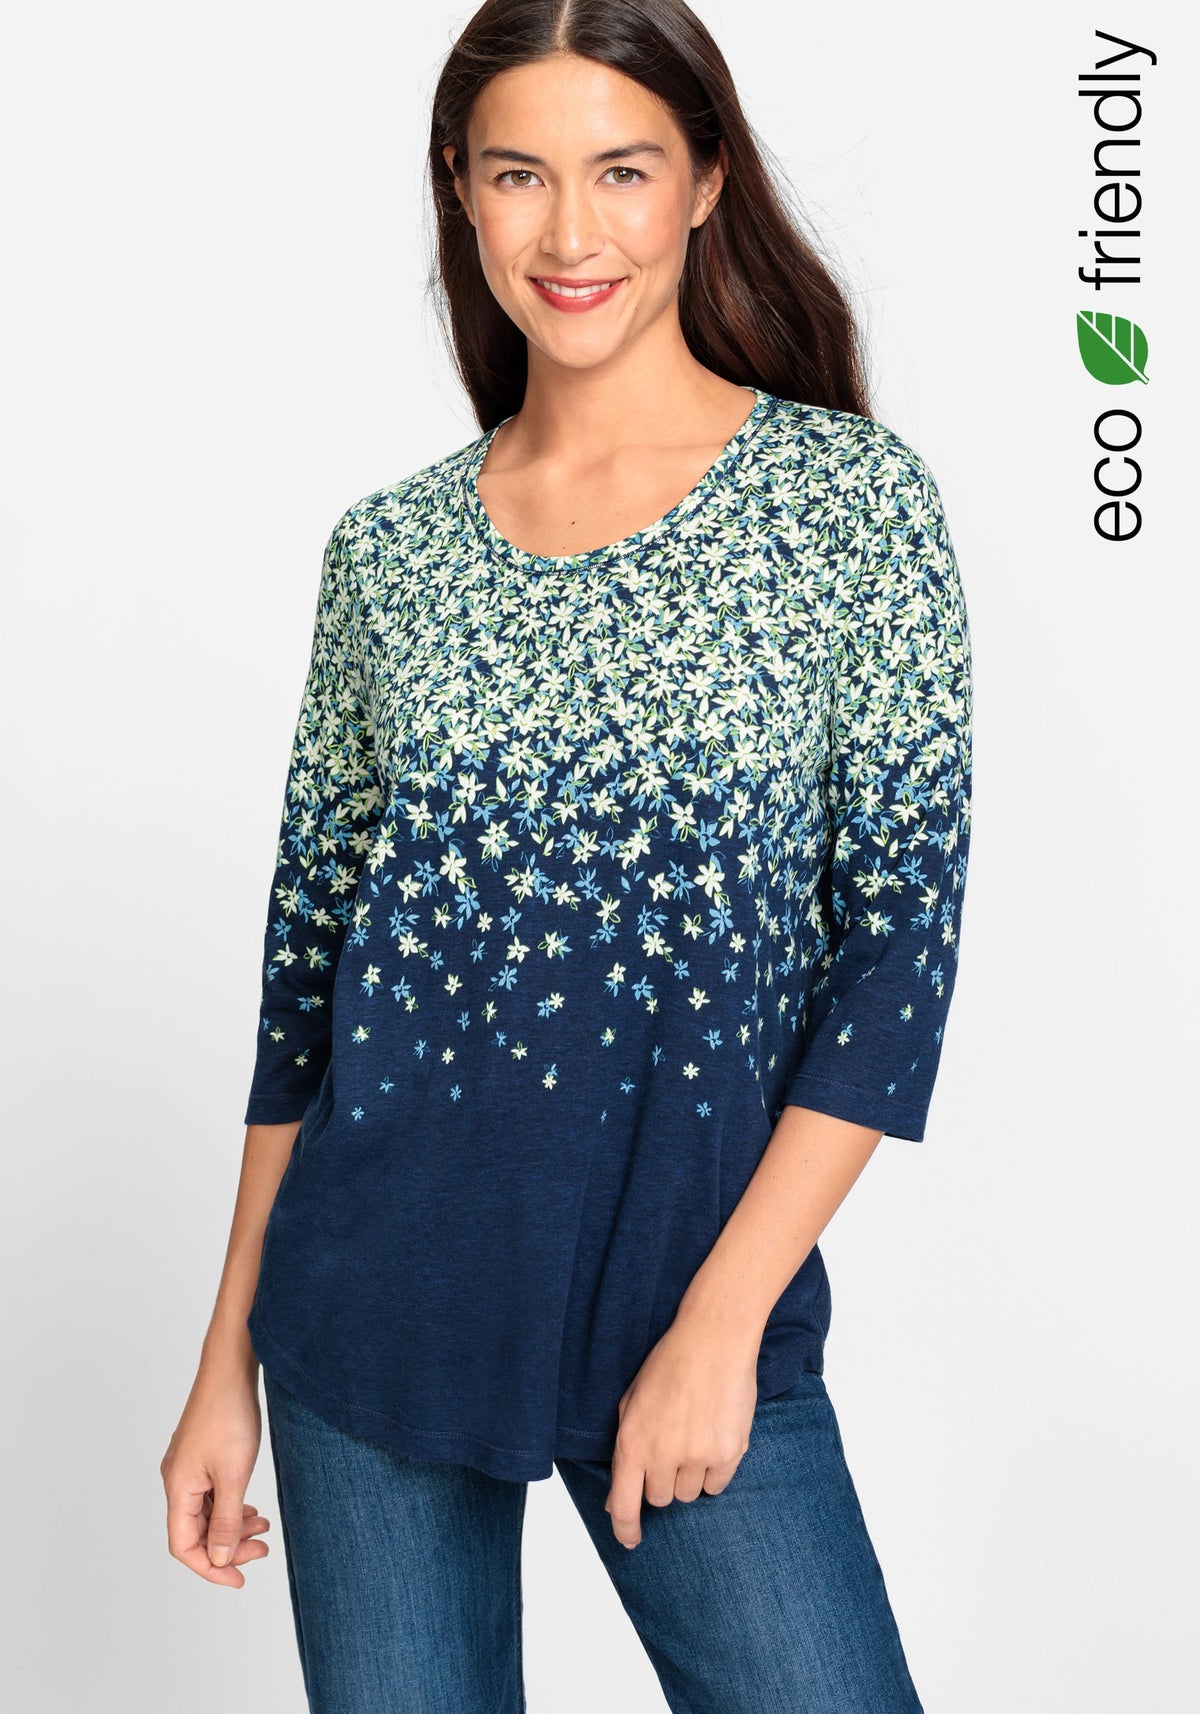 3/4 Sleeve Floral Print T-Shirt containing TENCEL™ Modal